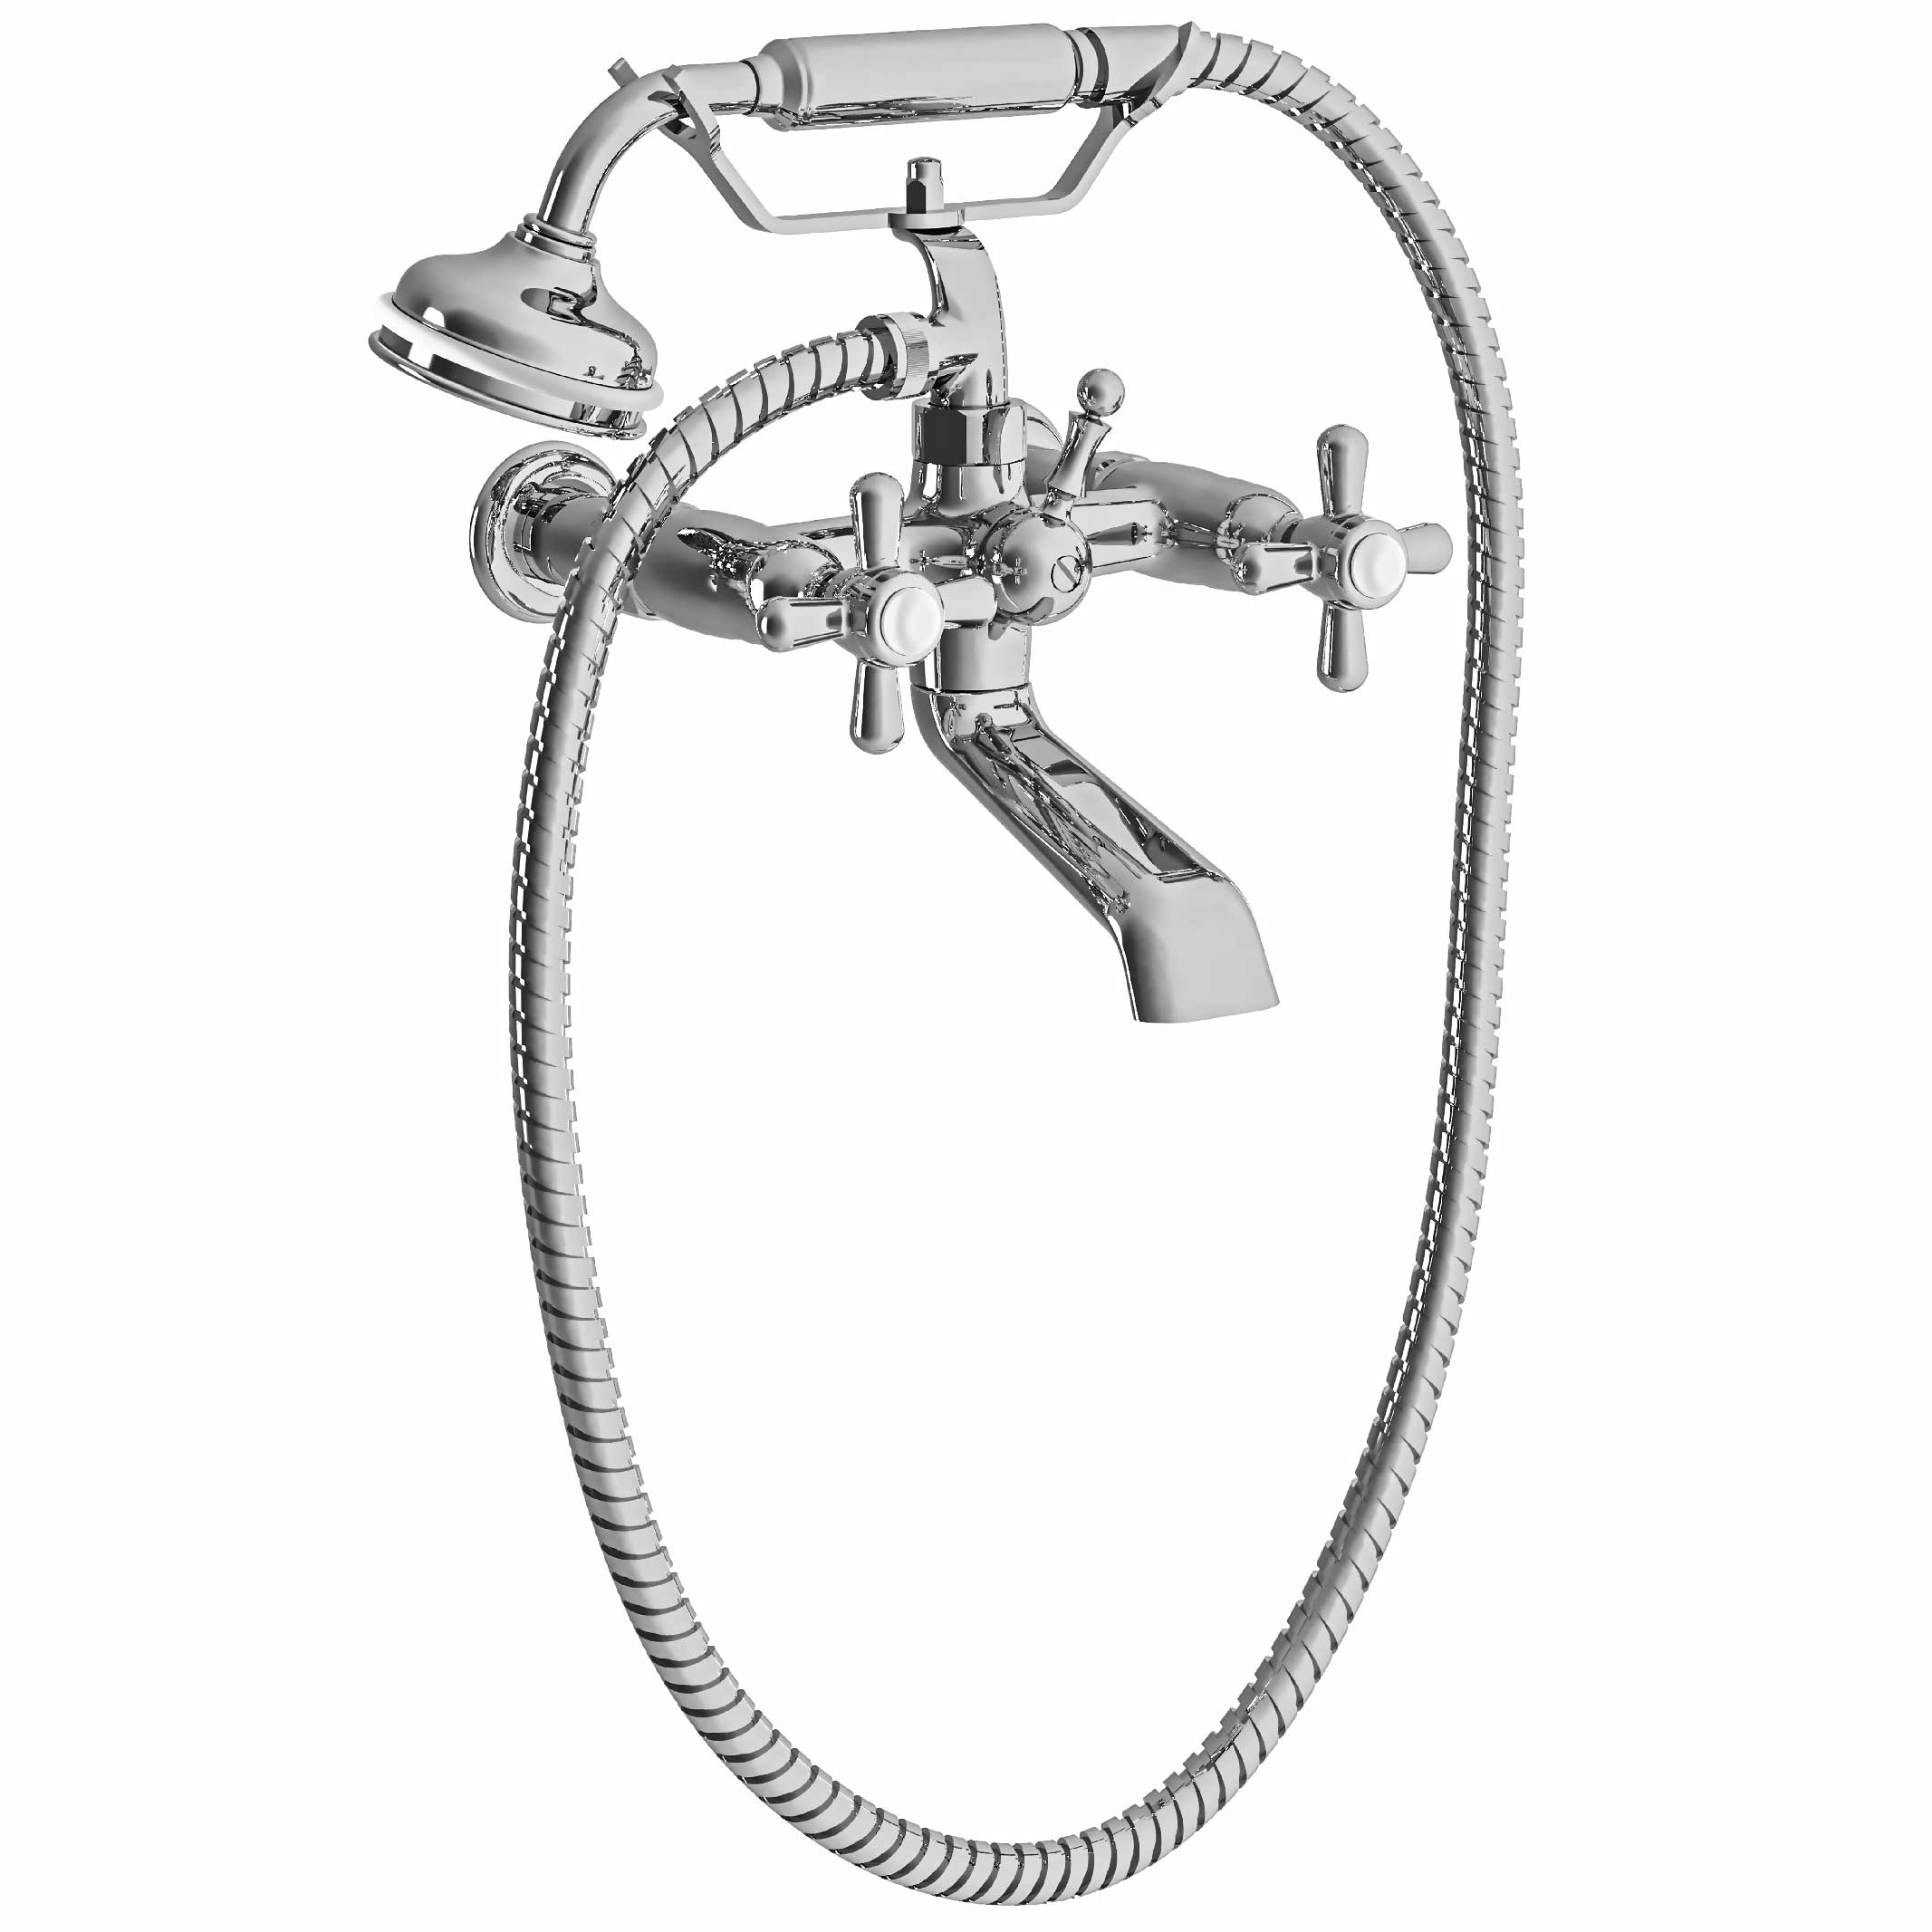 M40-3201 Wall mounted bath and shower mixer